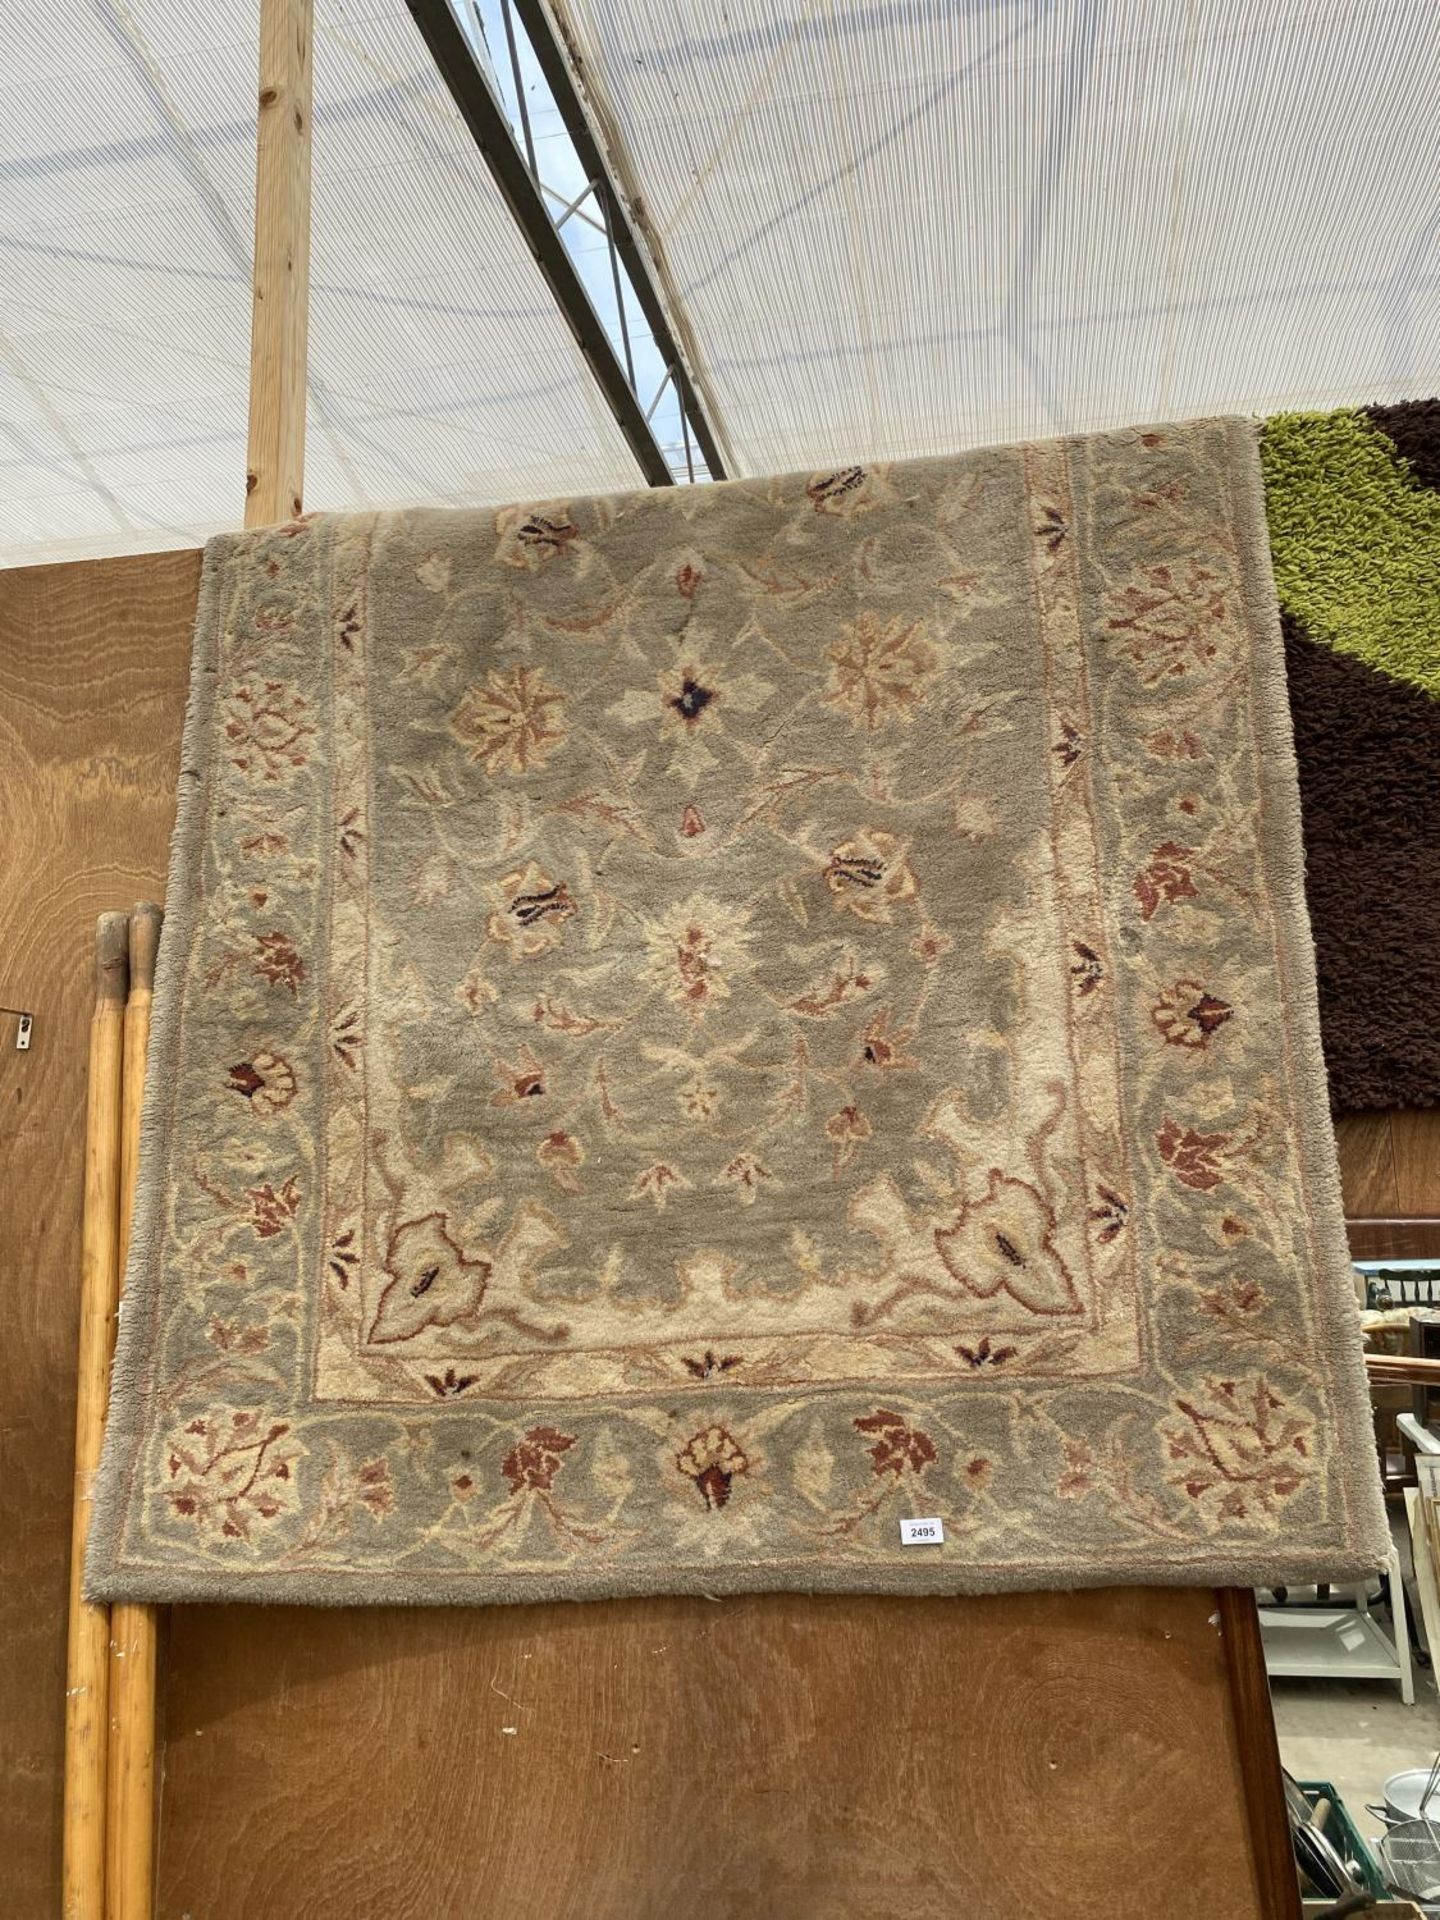 A CREAM PATTERNED RUG